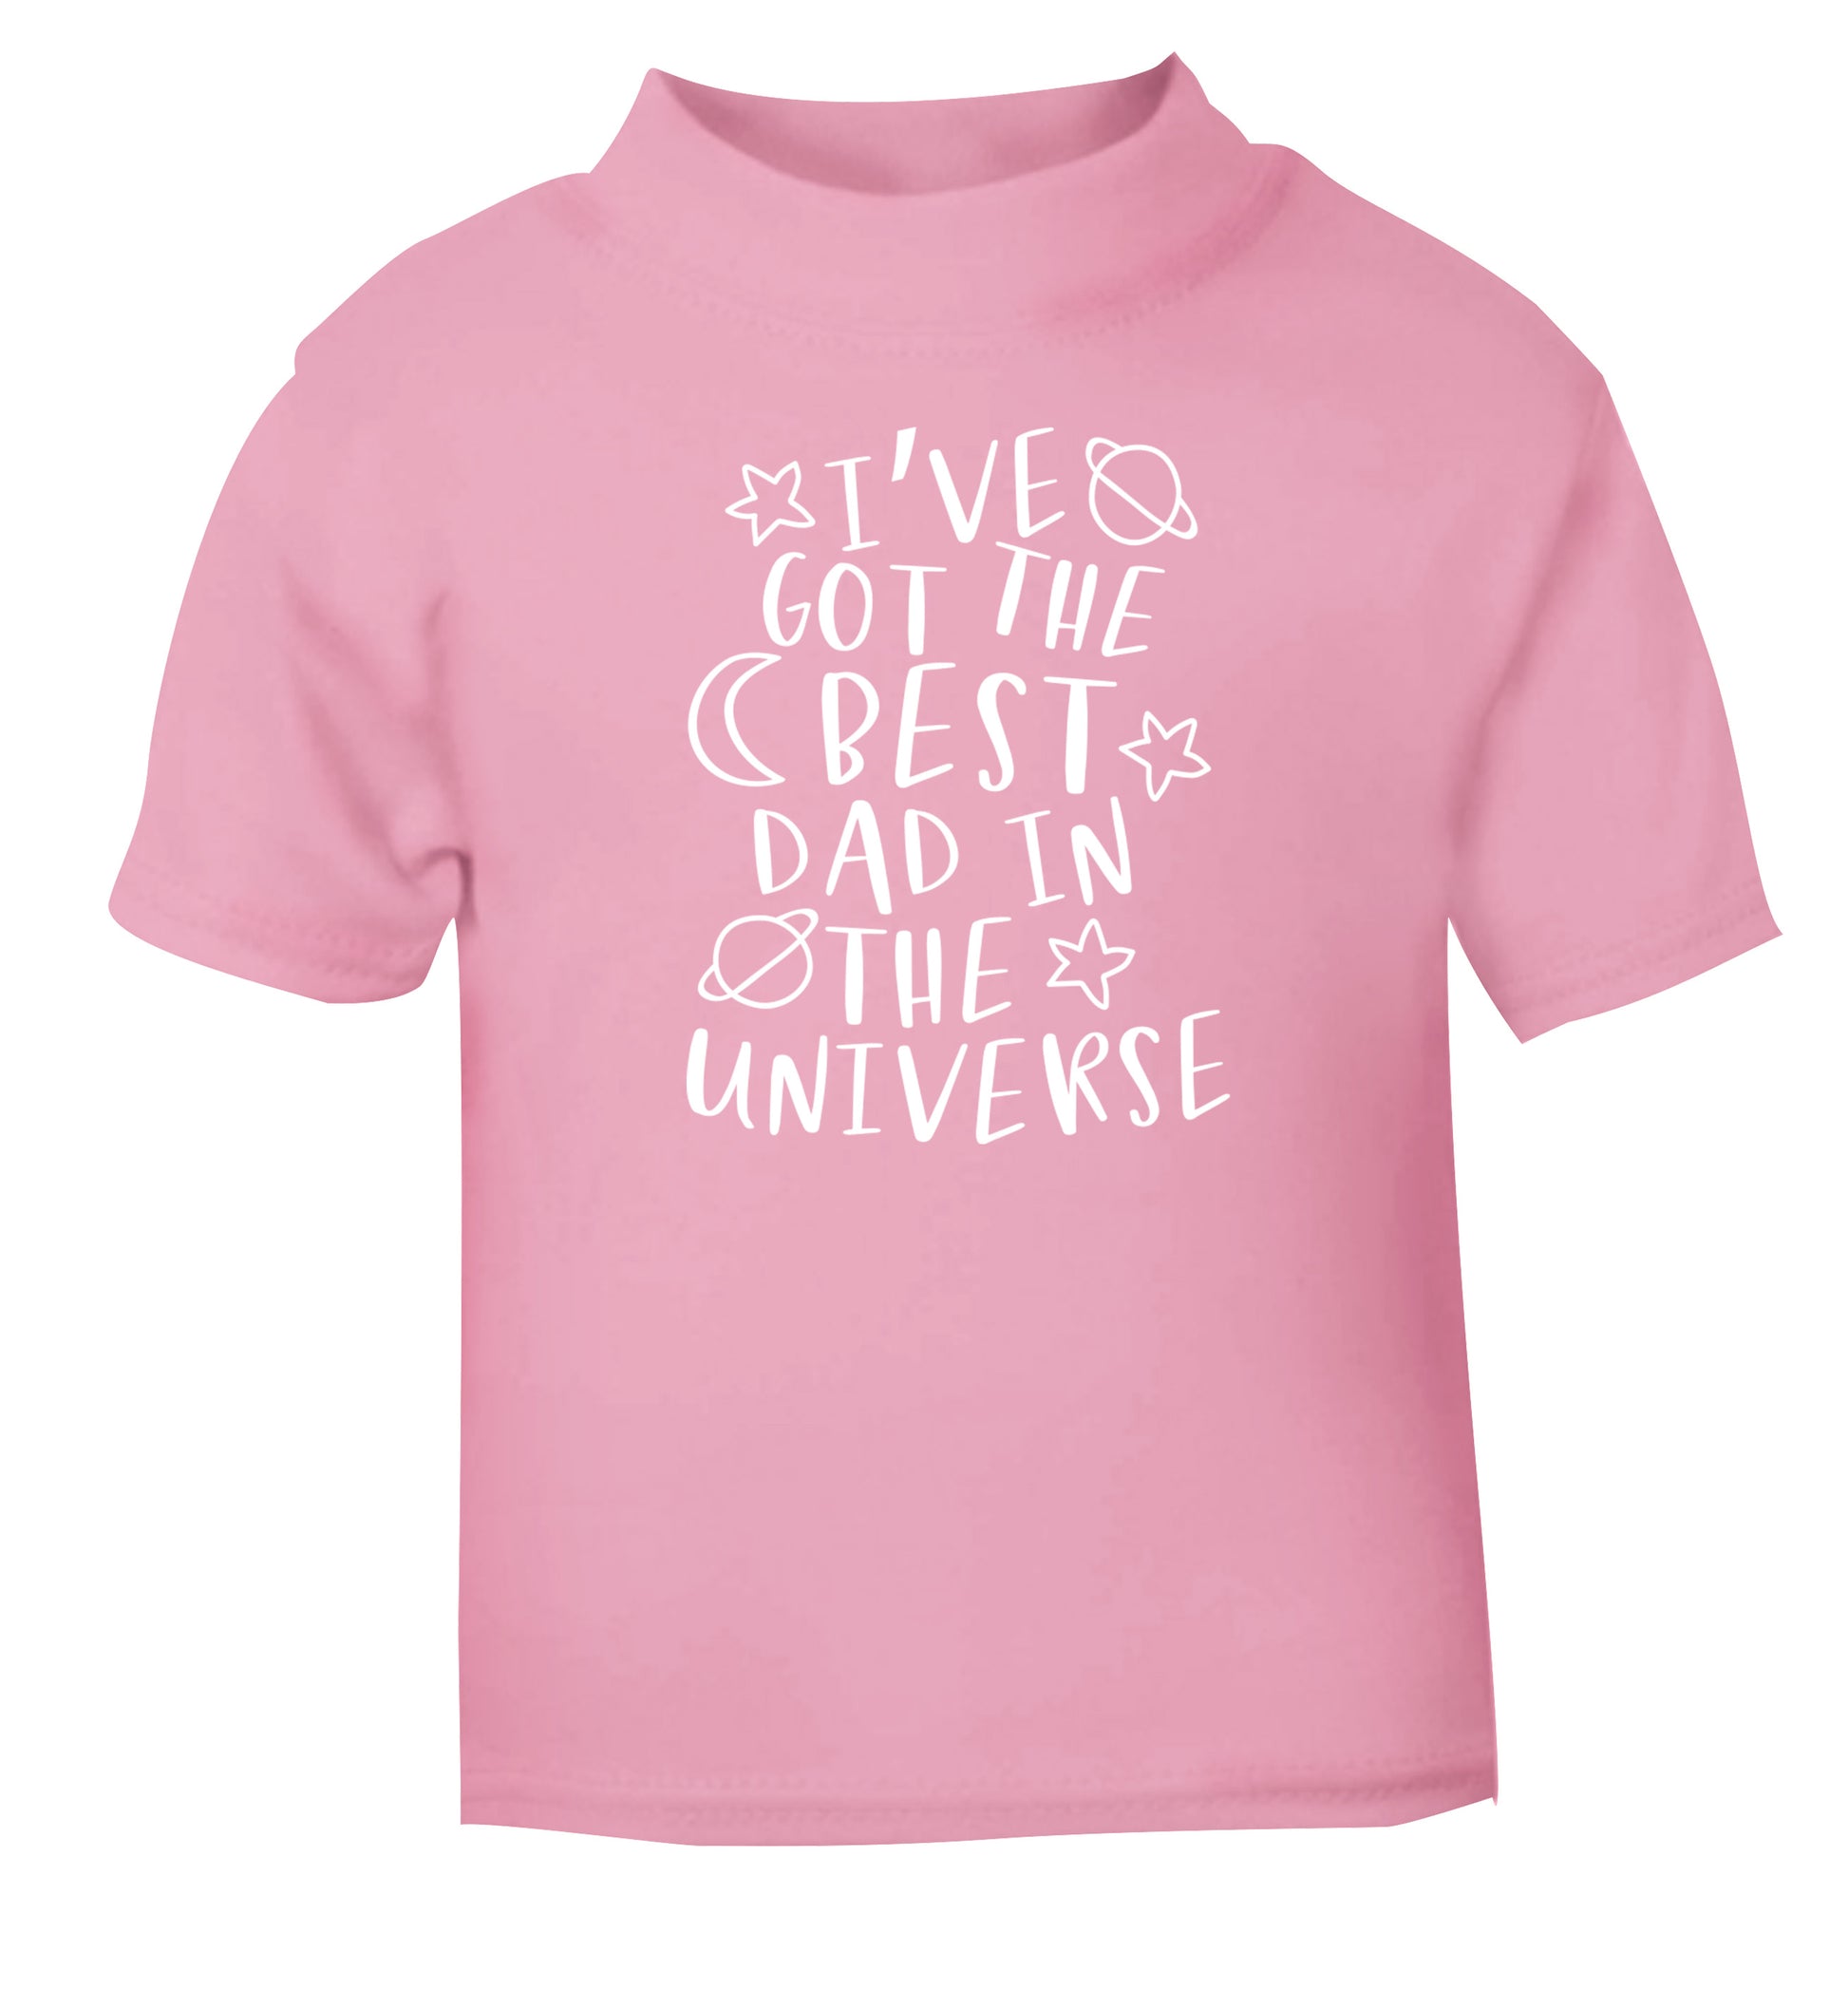 I've got the best dad in the universe light pink Baby Toddler Tshirt 2 Years